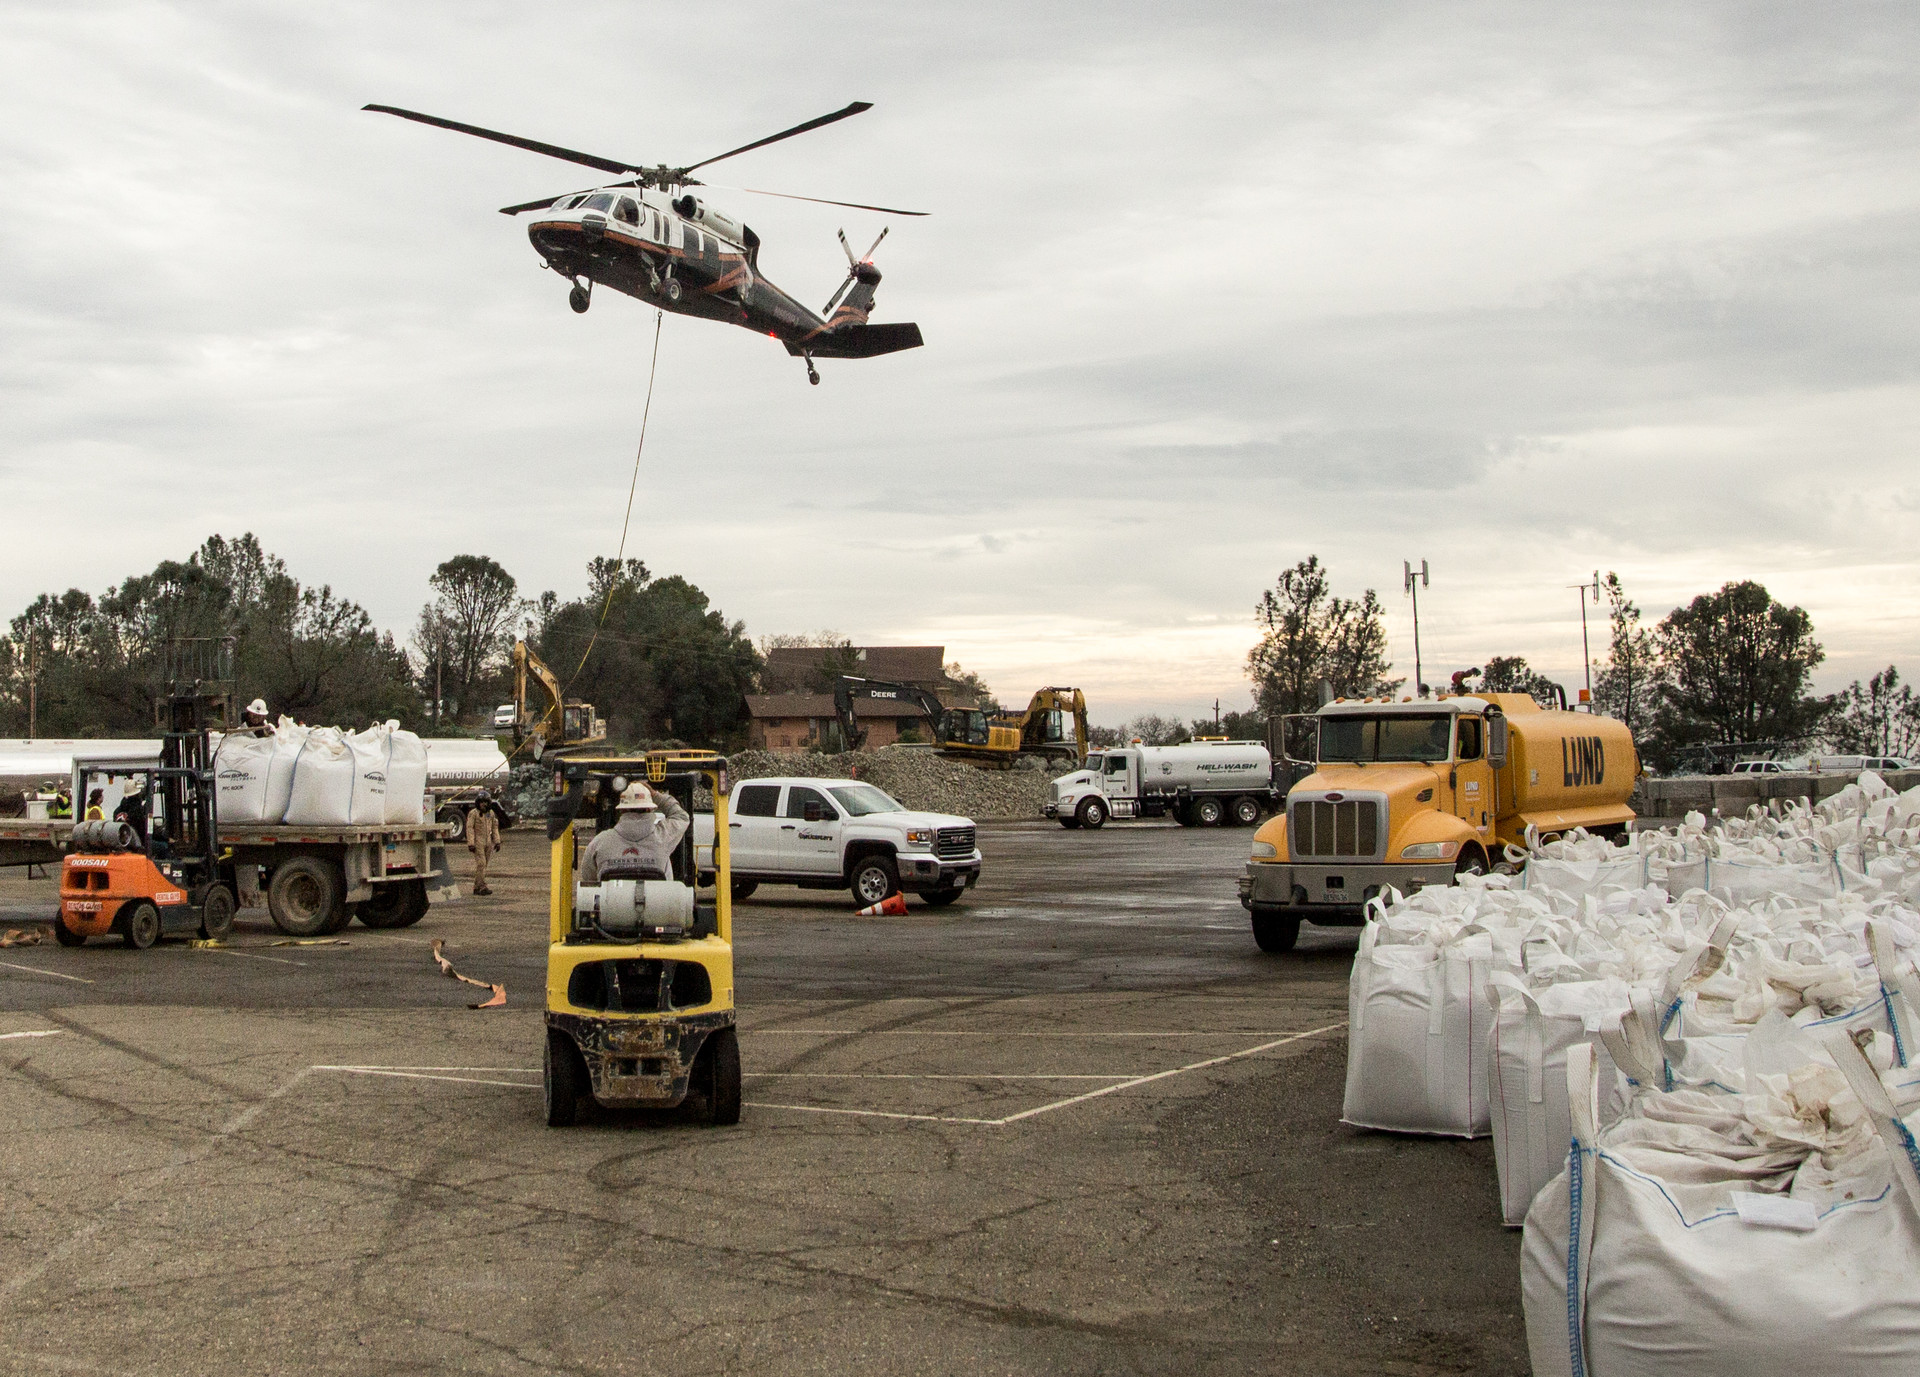 Blackhawk helicopters buzzed back and forth across the dam, carrying 4,000-pound sacks of rock and gravel.